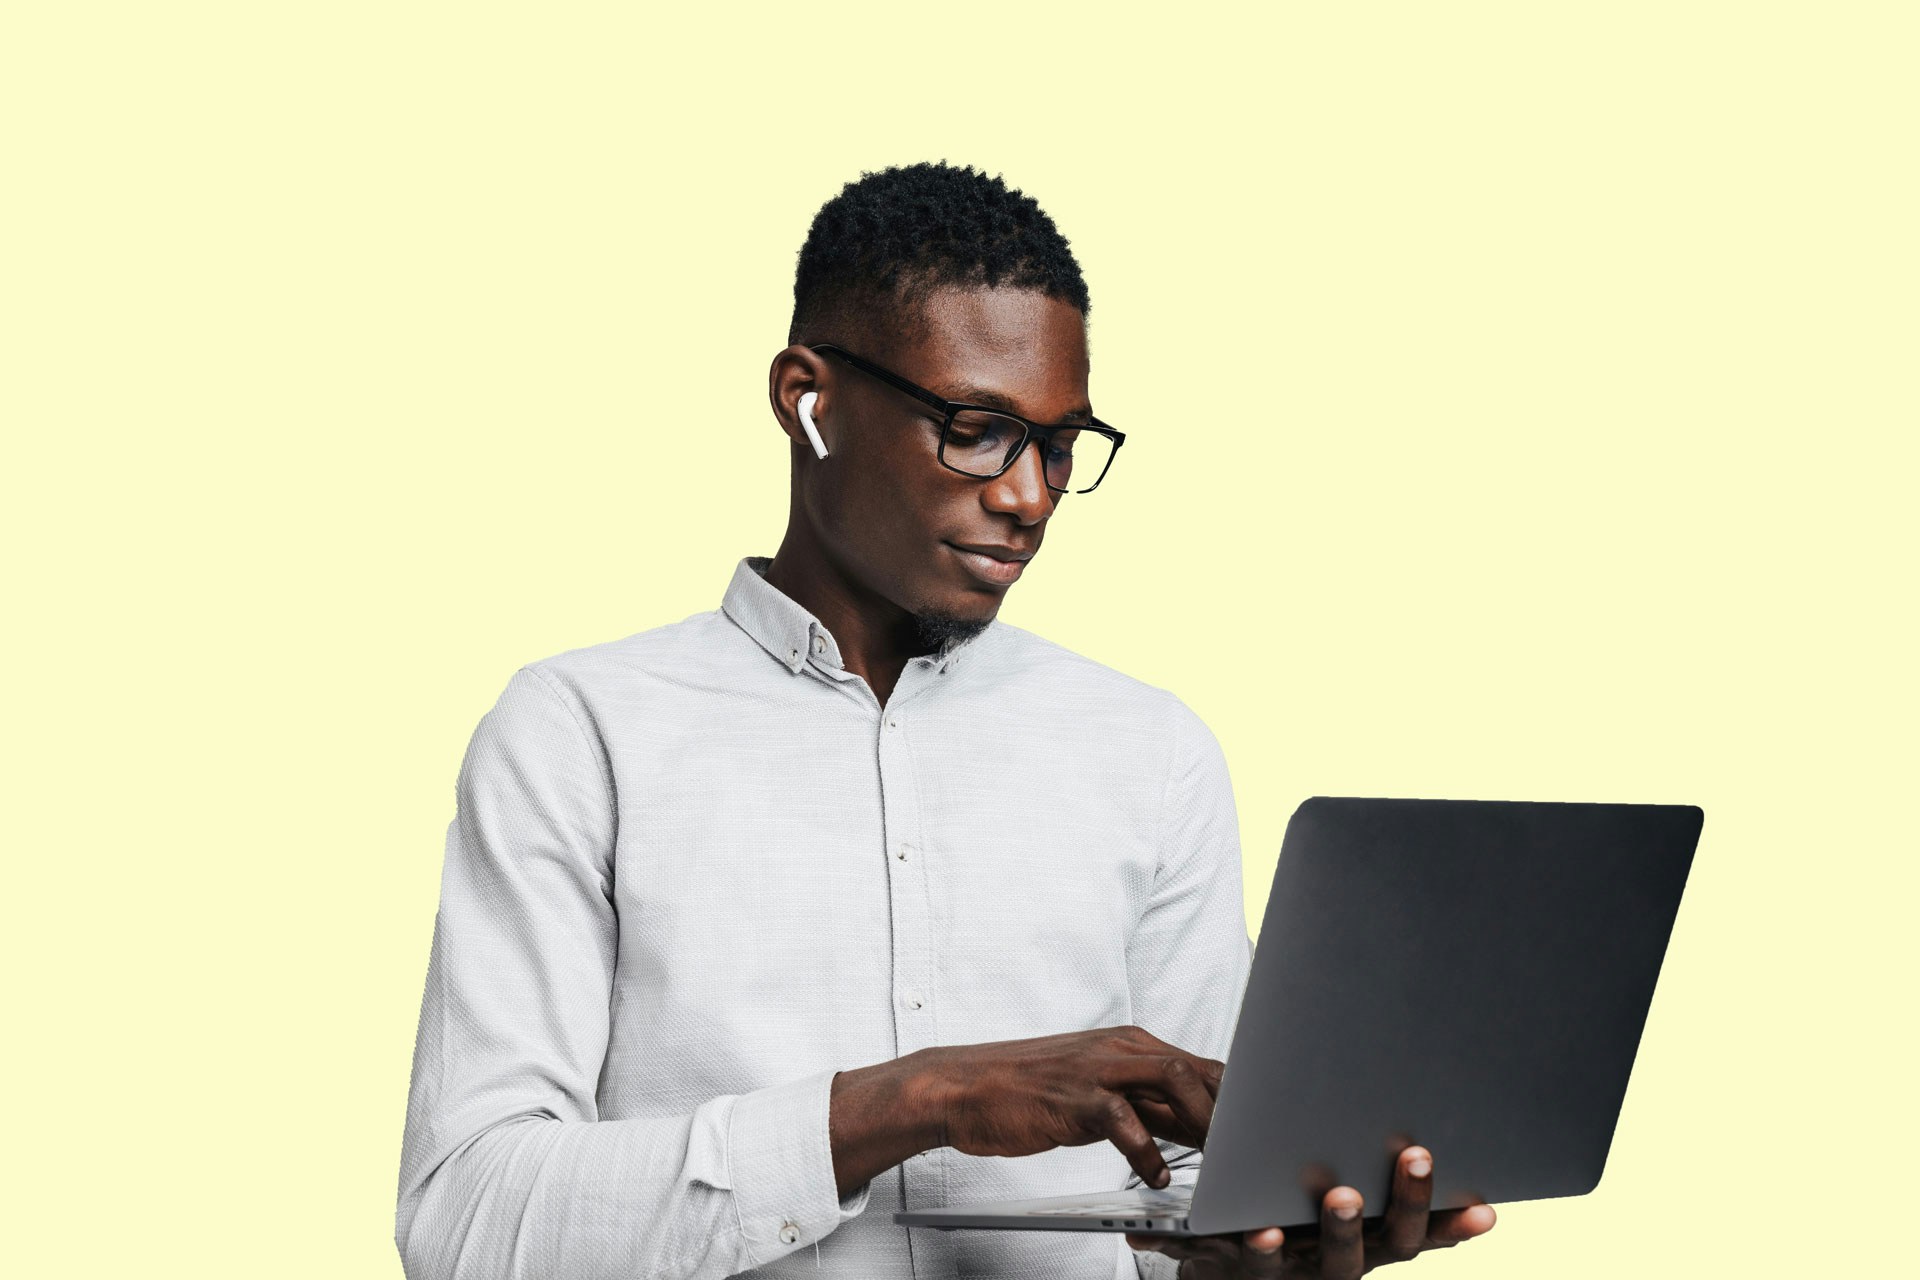 man working on a laptop in front of a yellow background